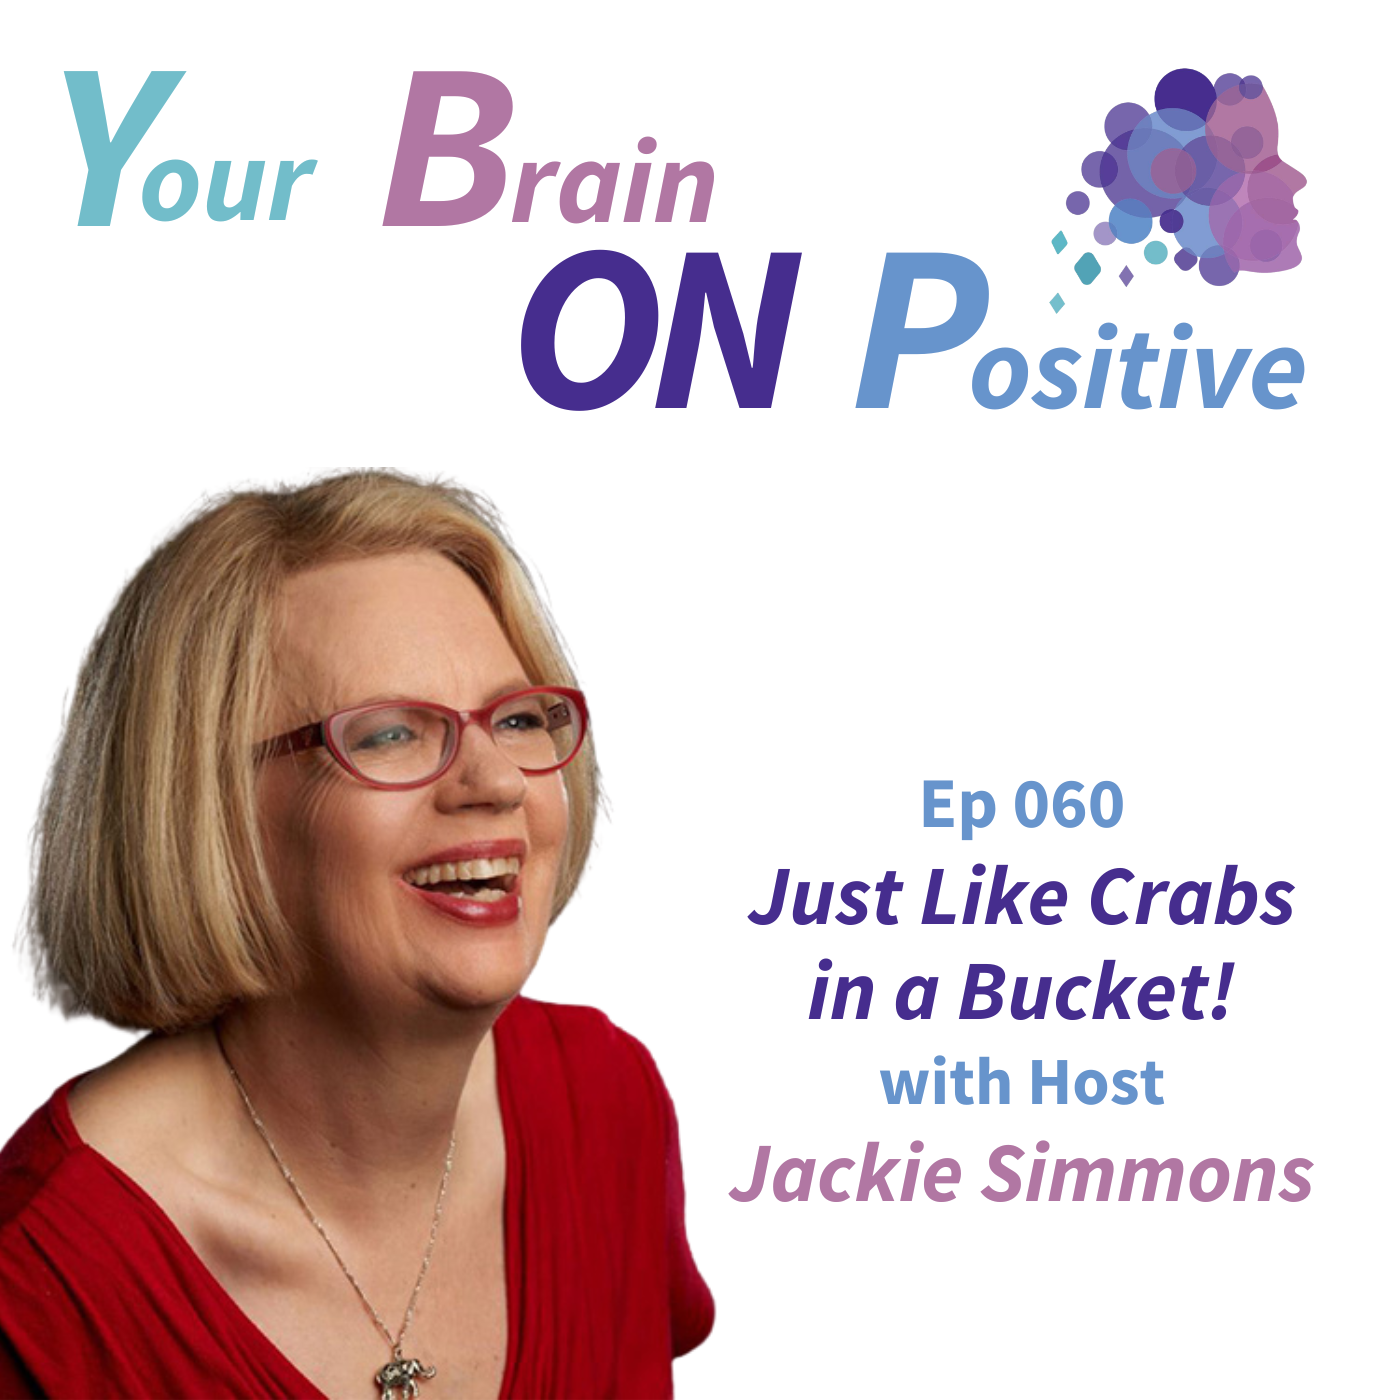 Just Like Crabs in a Bucket - Jackie Simmons